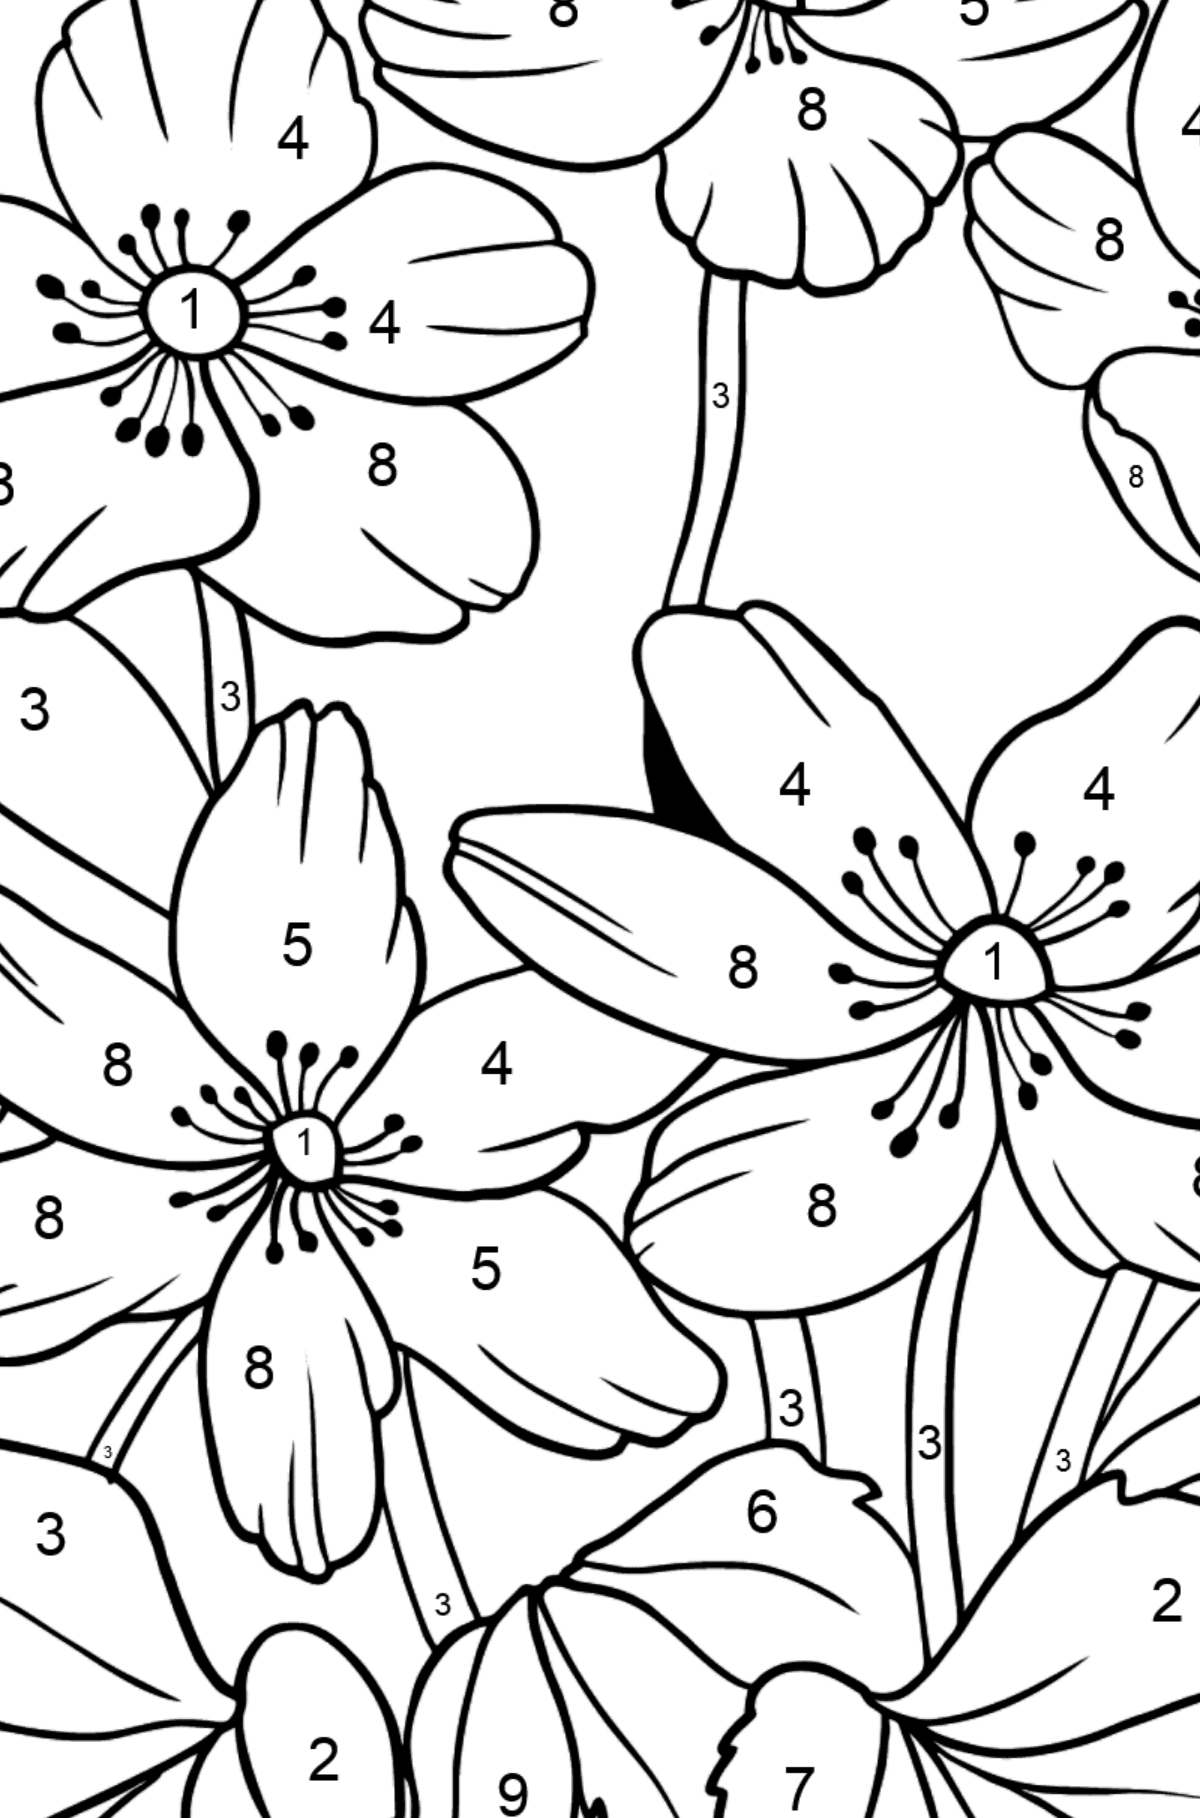 Flower Coloring Page - A Windflower with Yellow Petals - Coloring by Numbers for Kids